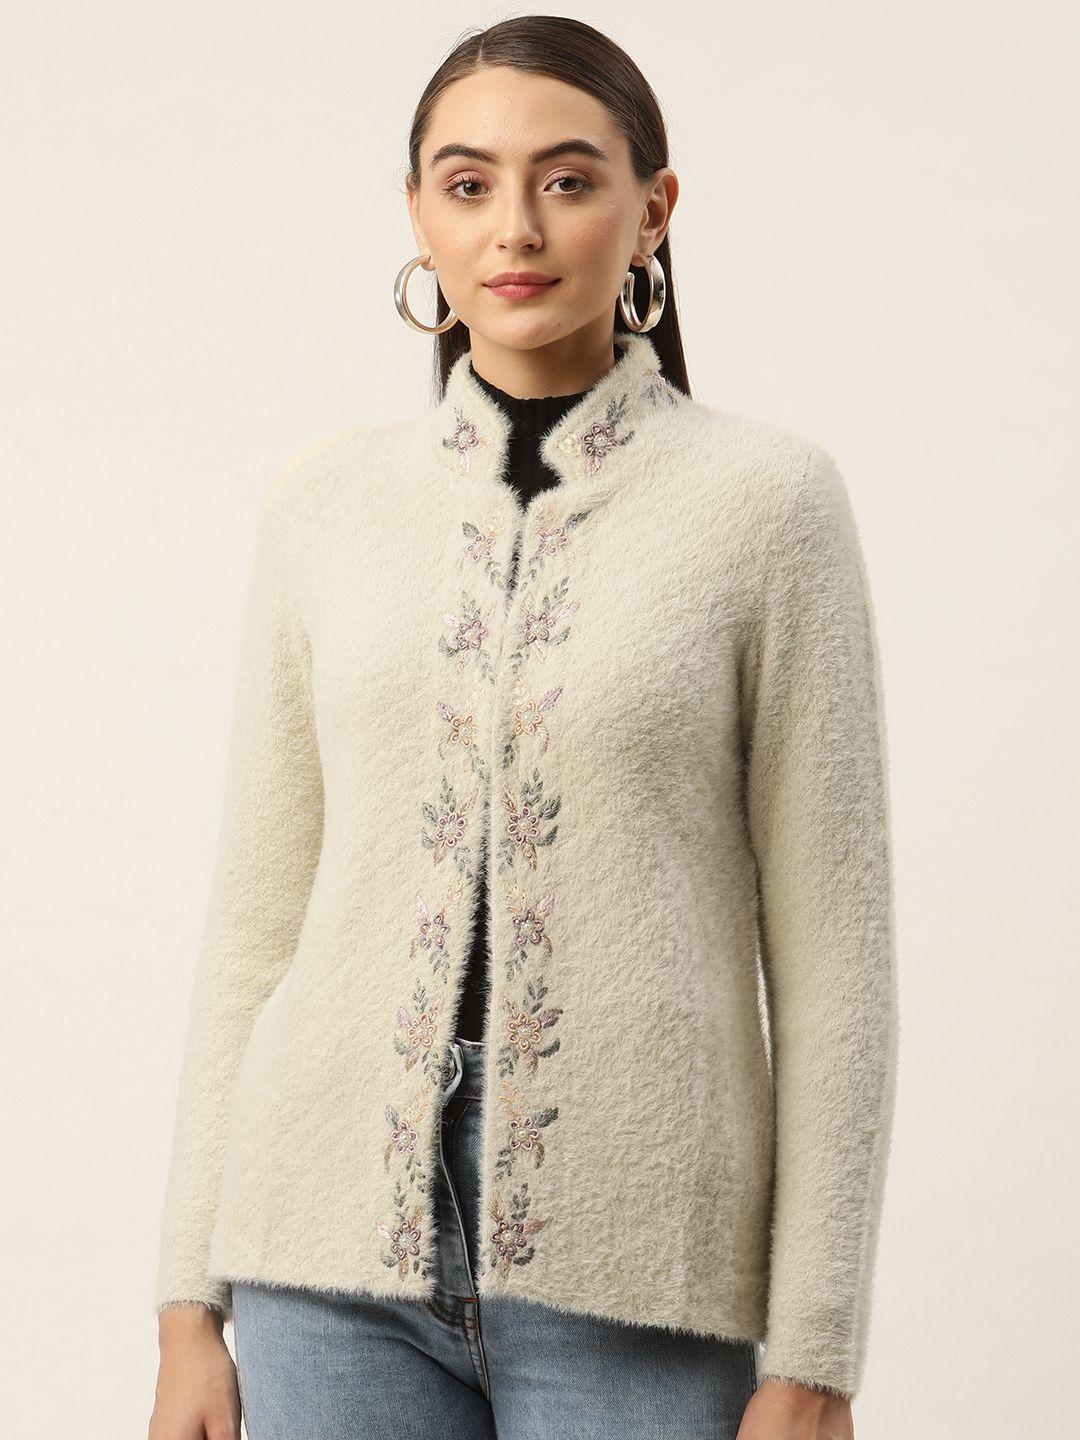 apsley women embroidered detail cardigan